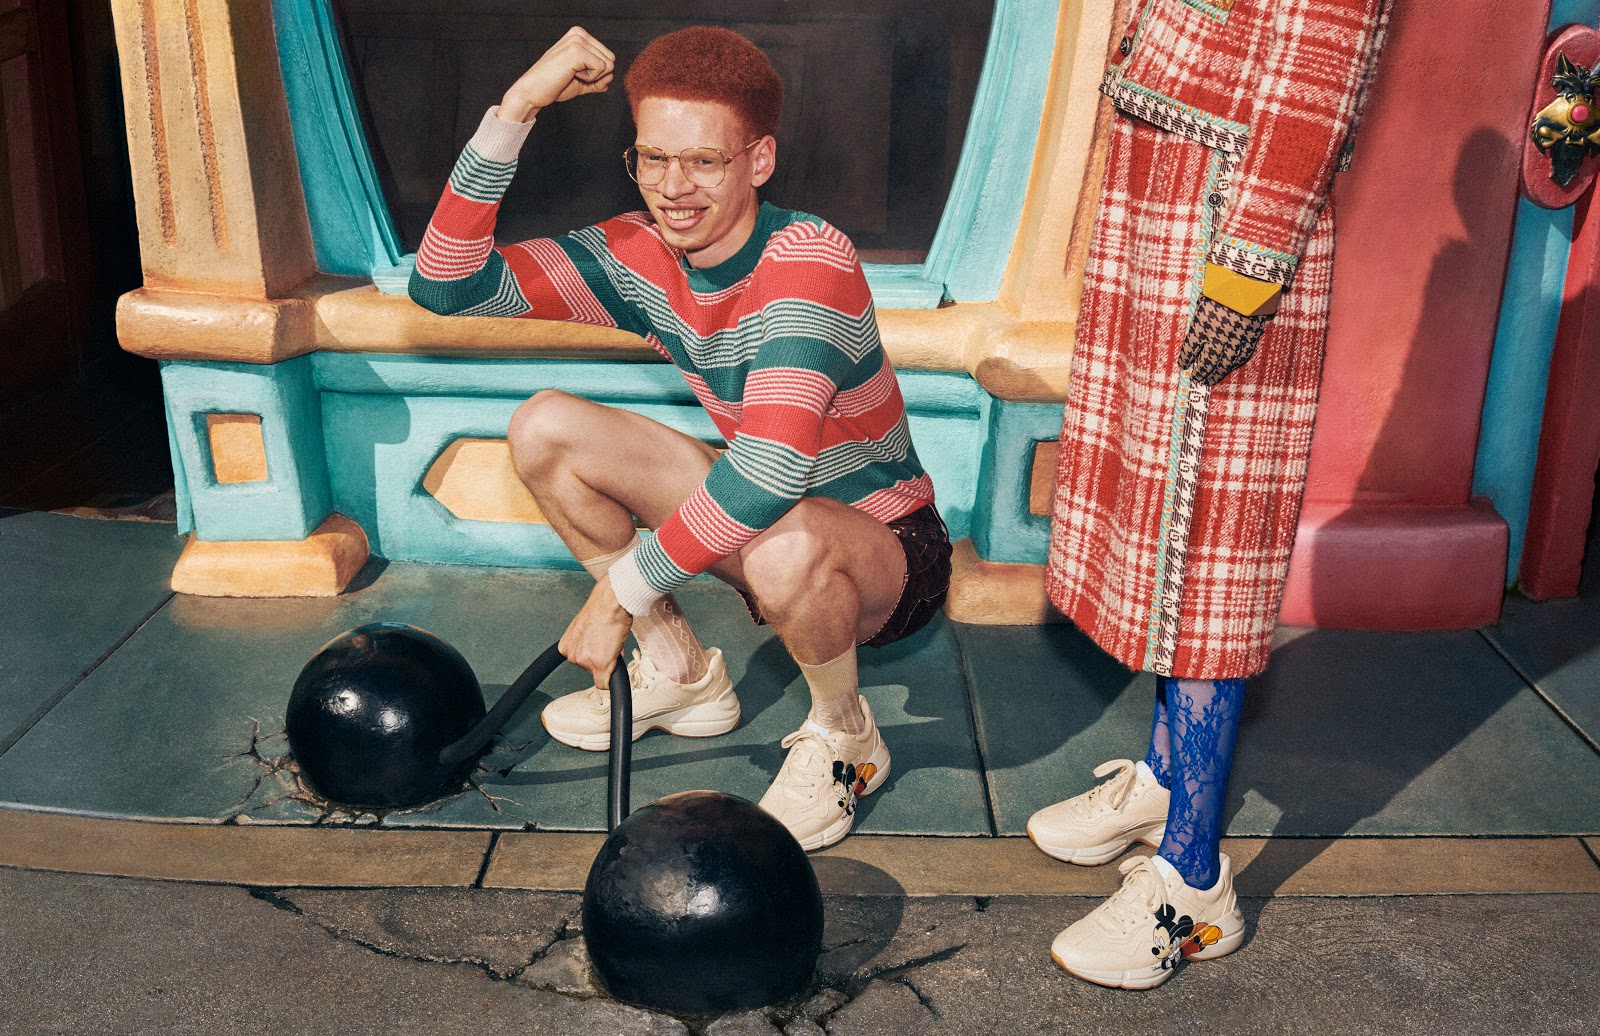 Disney x Gucci: Get Ready for the Chicest Disney Collab - WDW Magazine